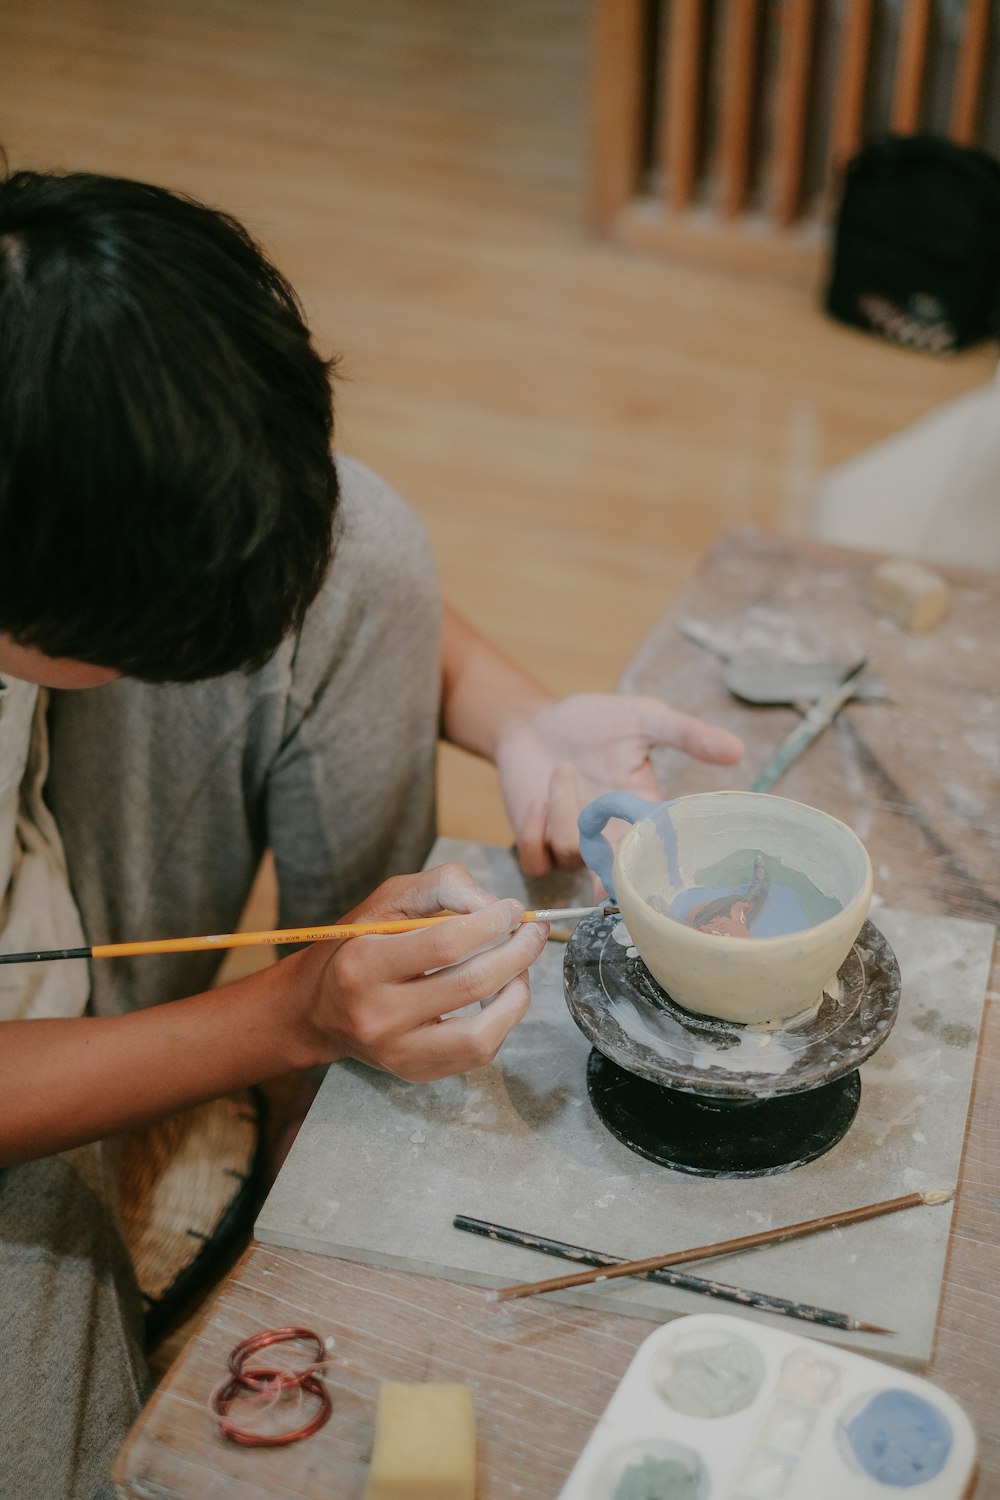 a boy is painting a bowl on a table